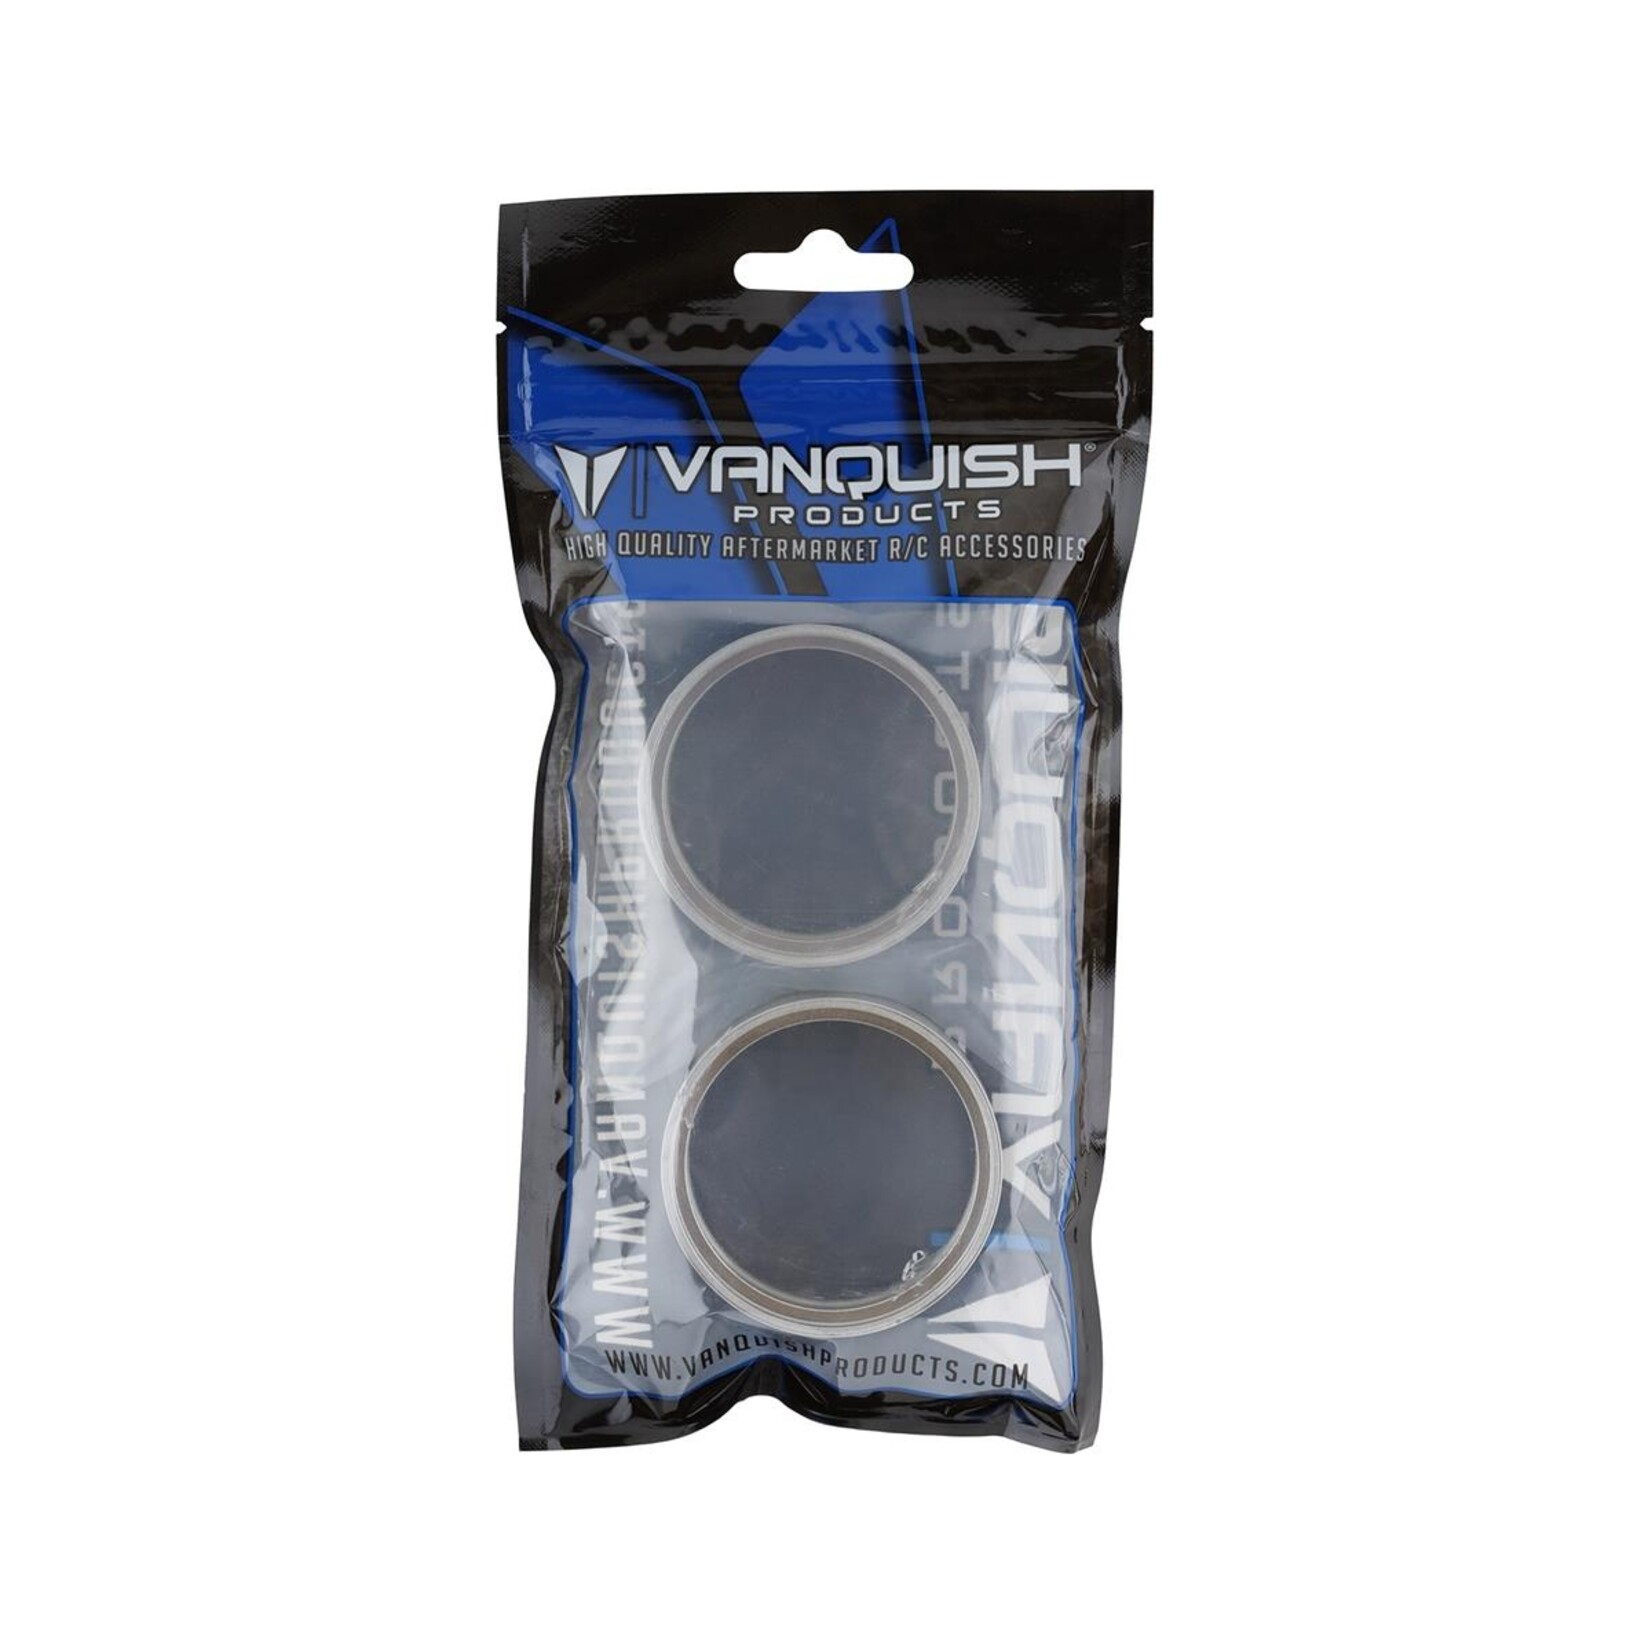 Vanquish Products Vanquish Products Aluminum 1.9" Wheel Clamp Rings (2) (1.0") #VPS05256